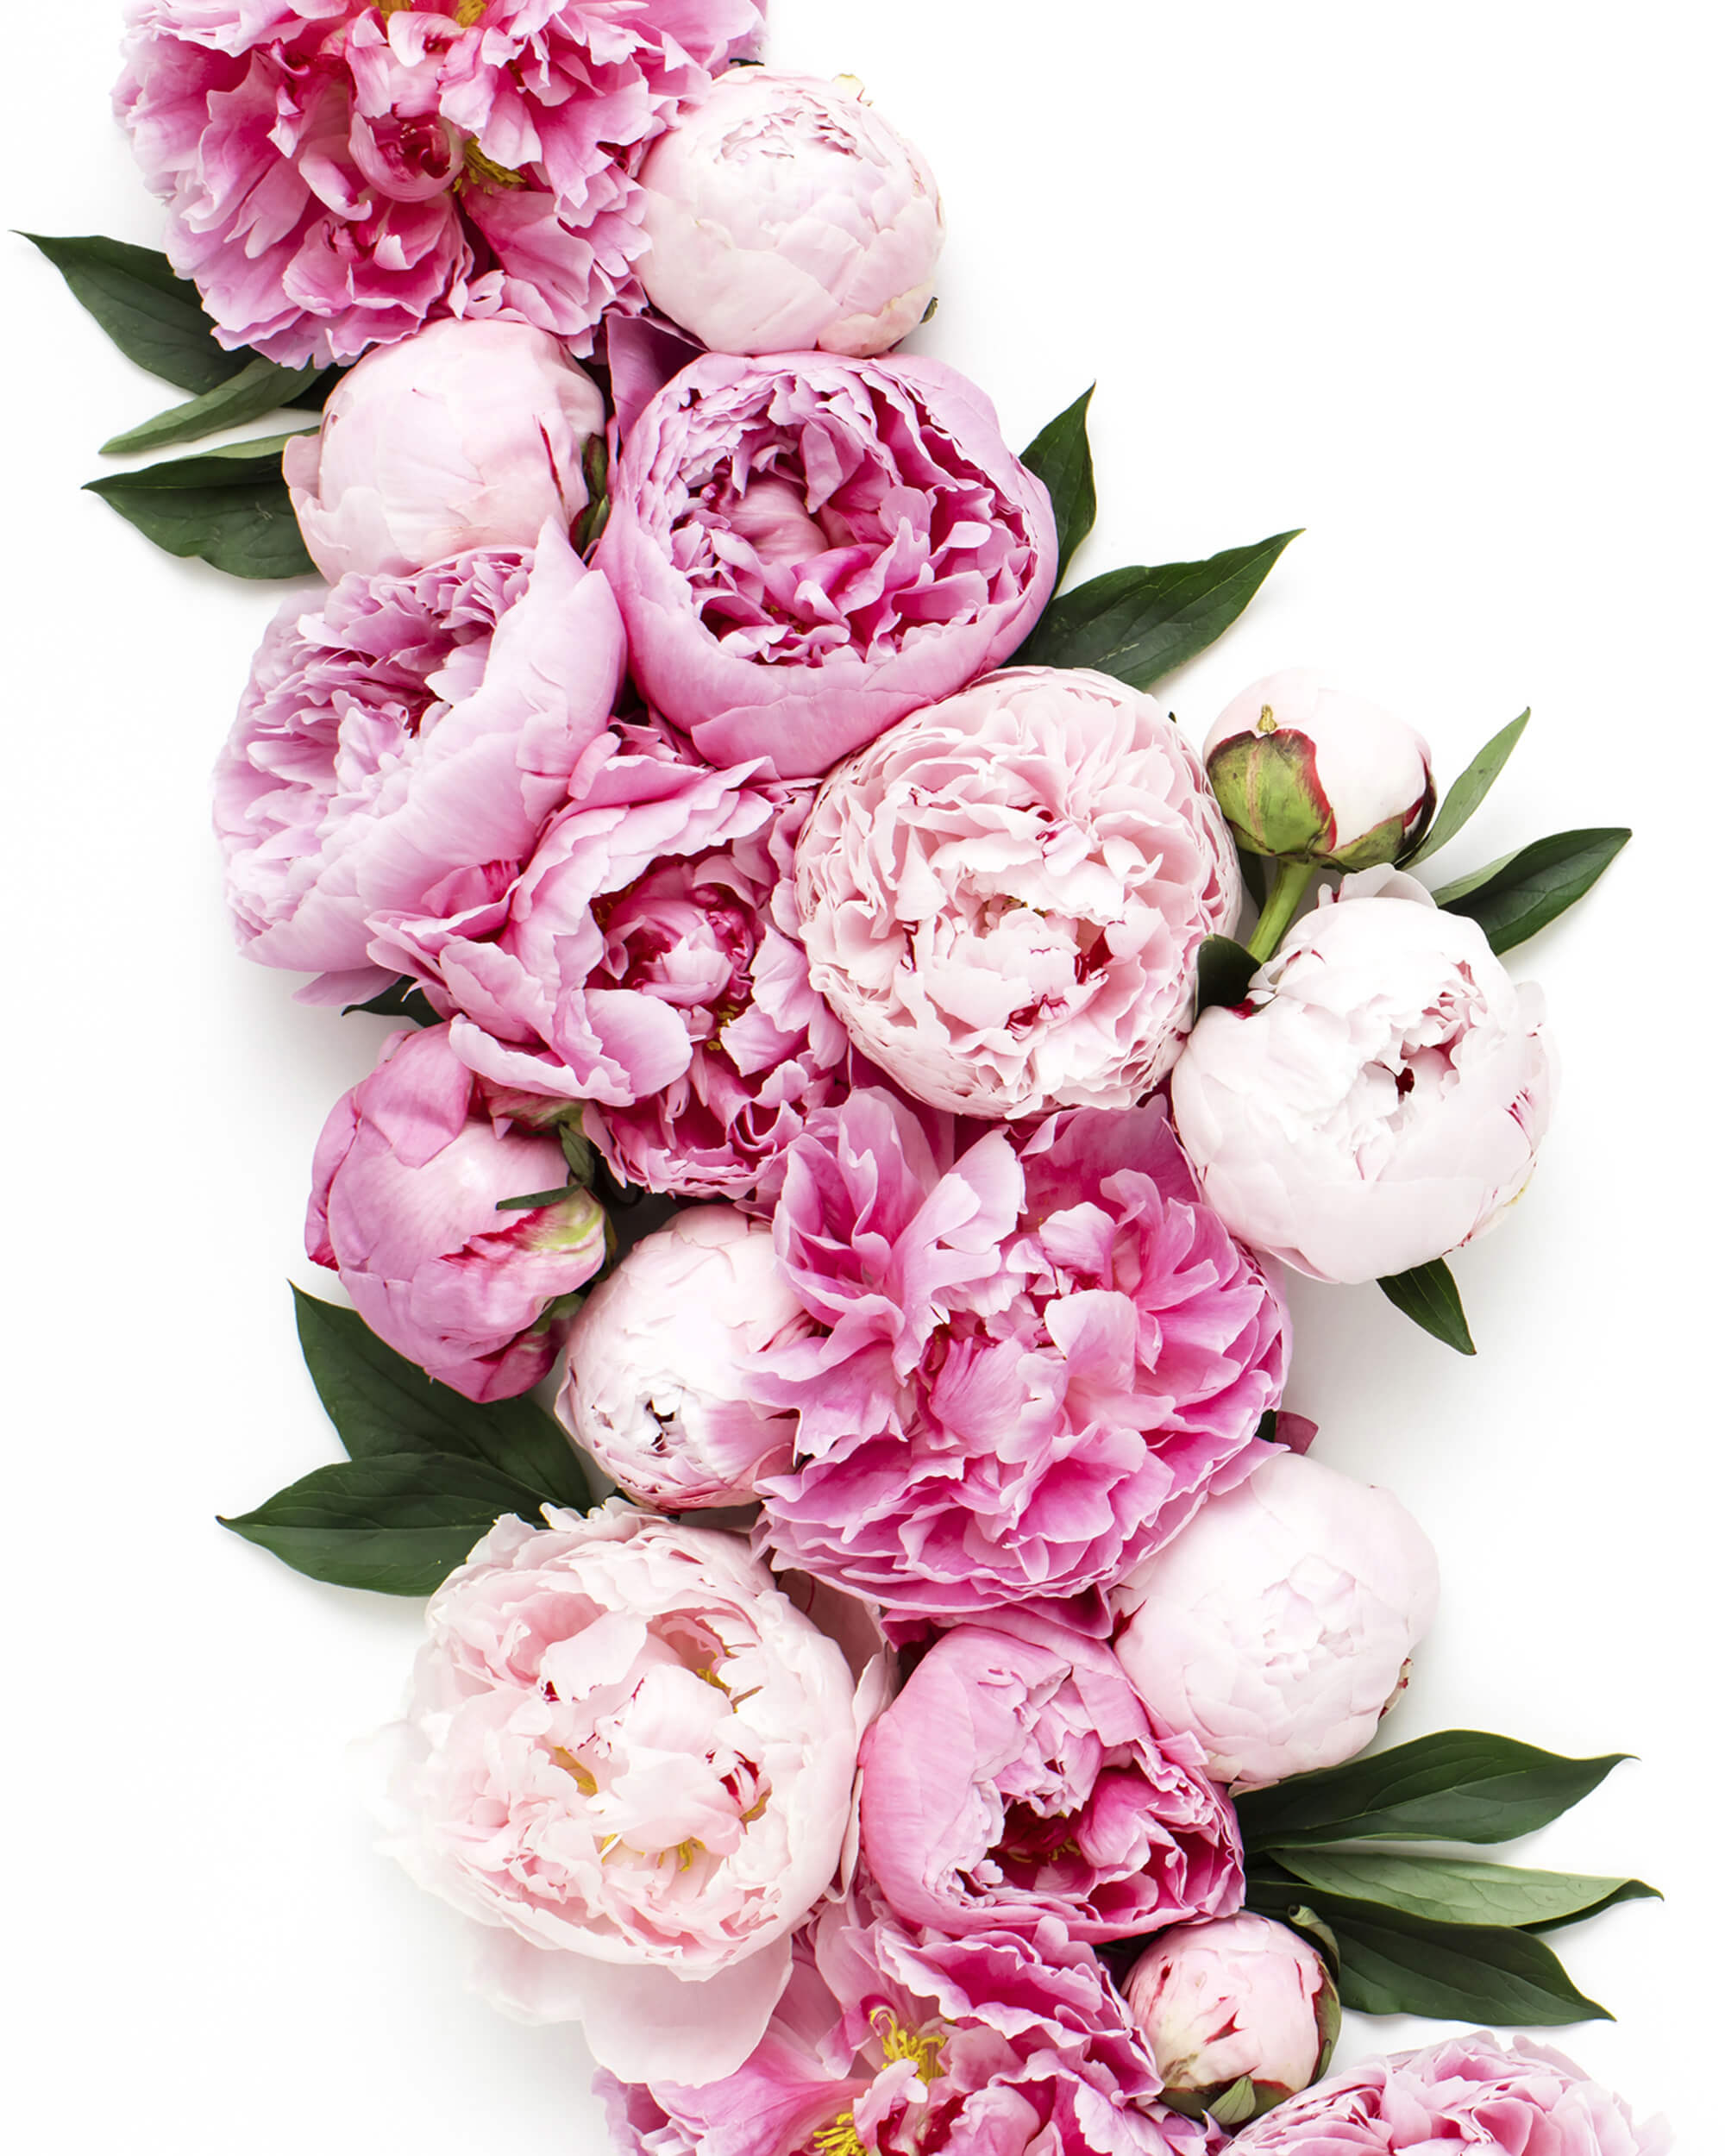 A bouquet of pink flowers